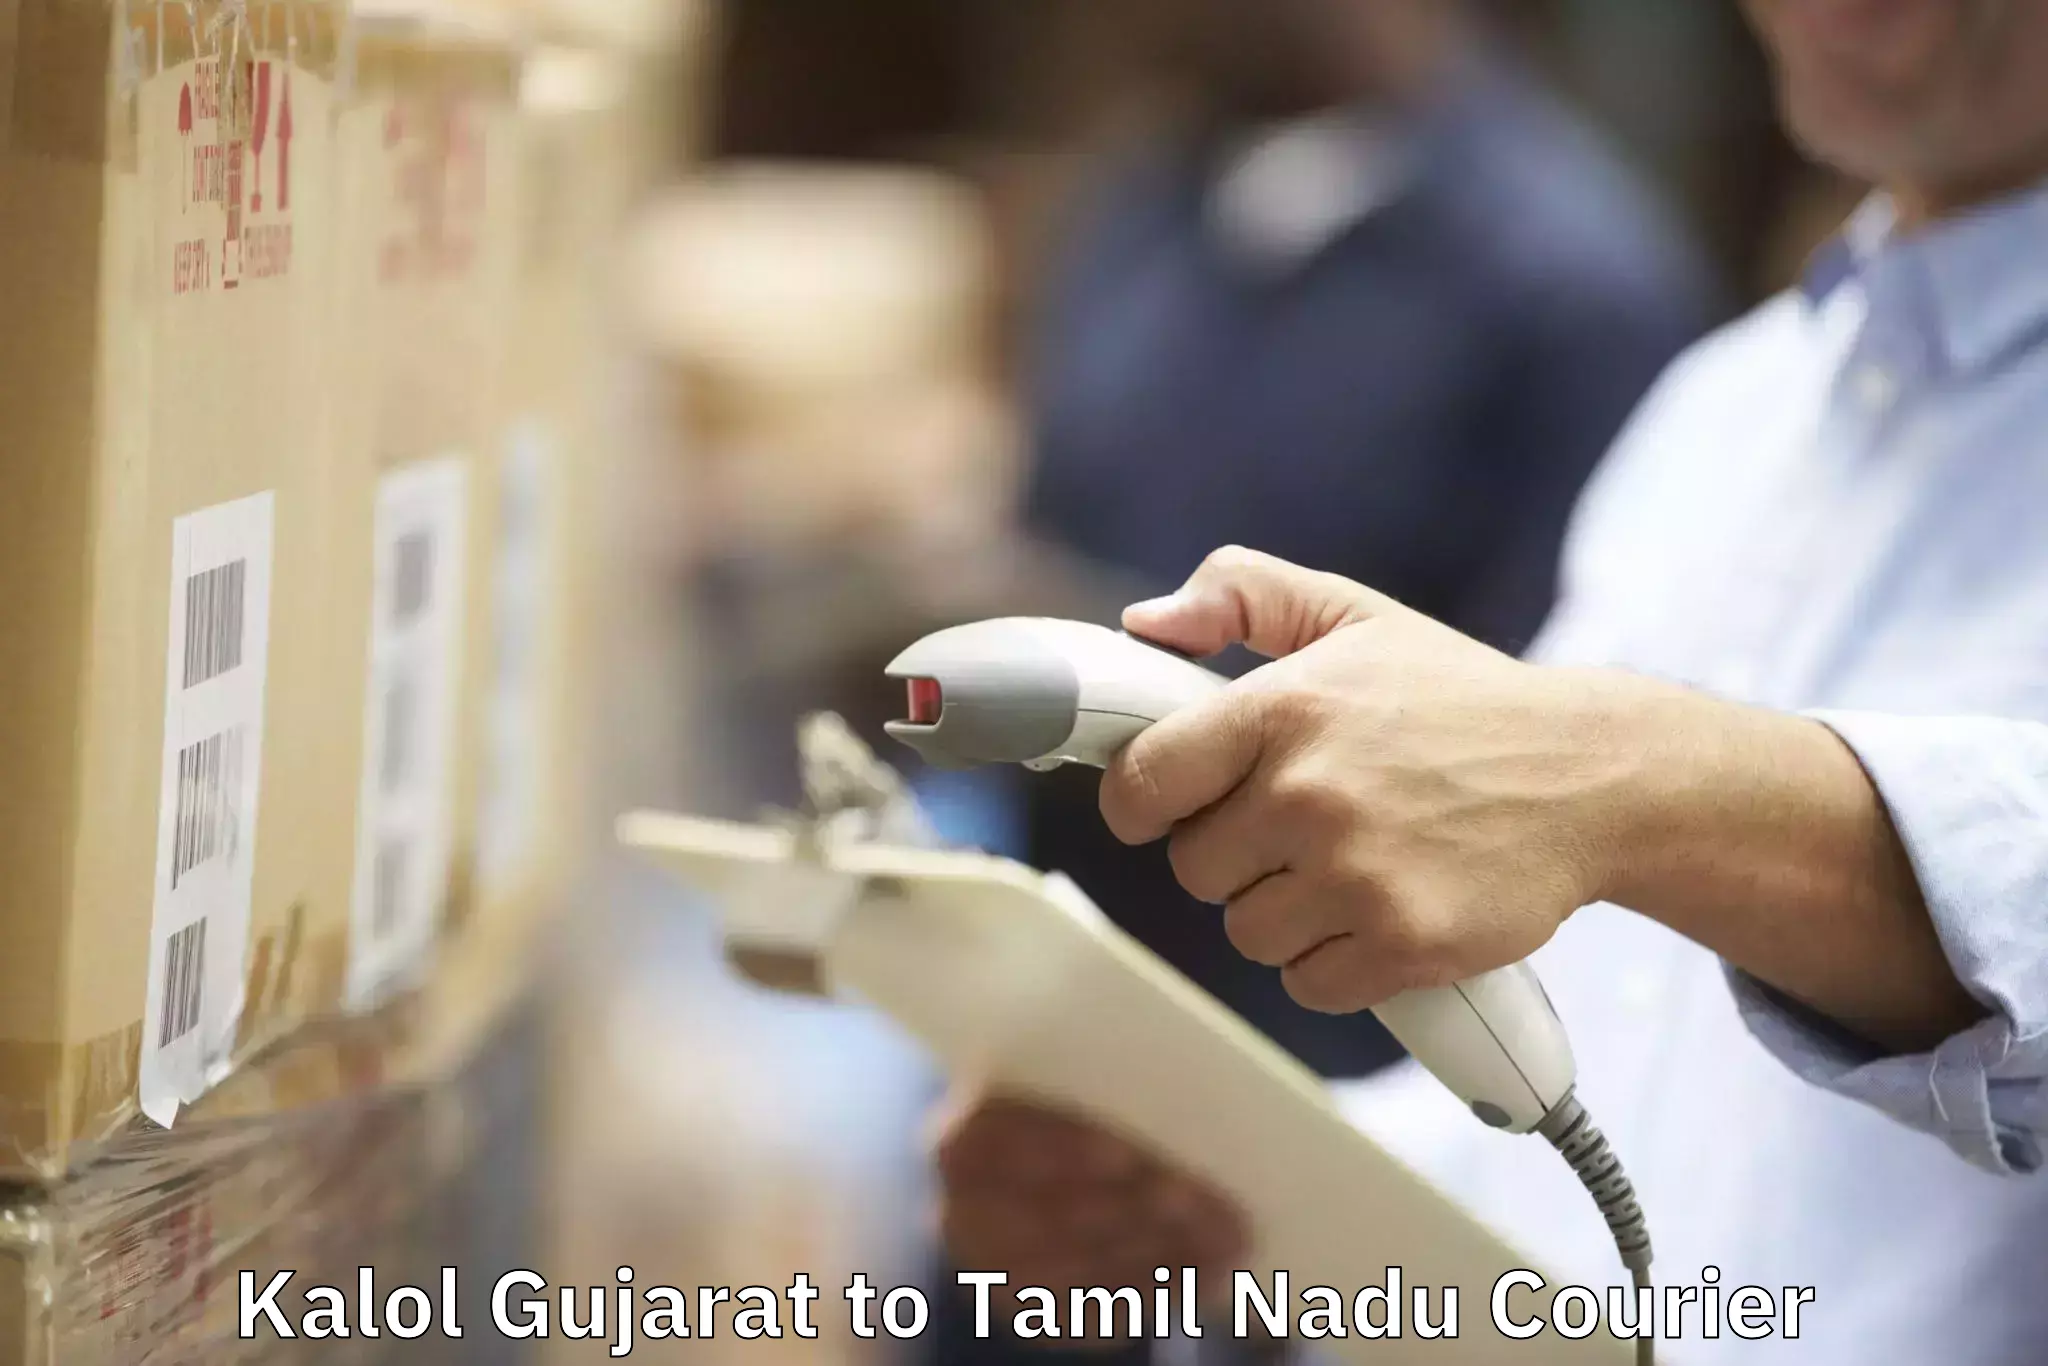 Affordable home movers Kalol Gujarat to Ennore Port Chennai